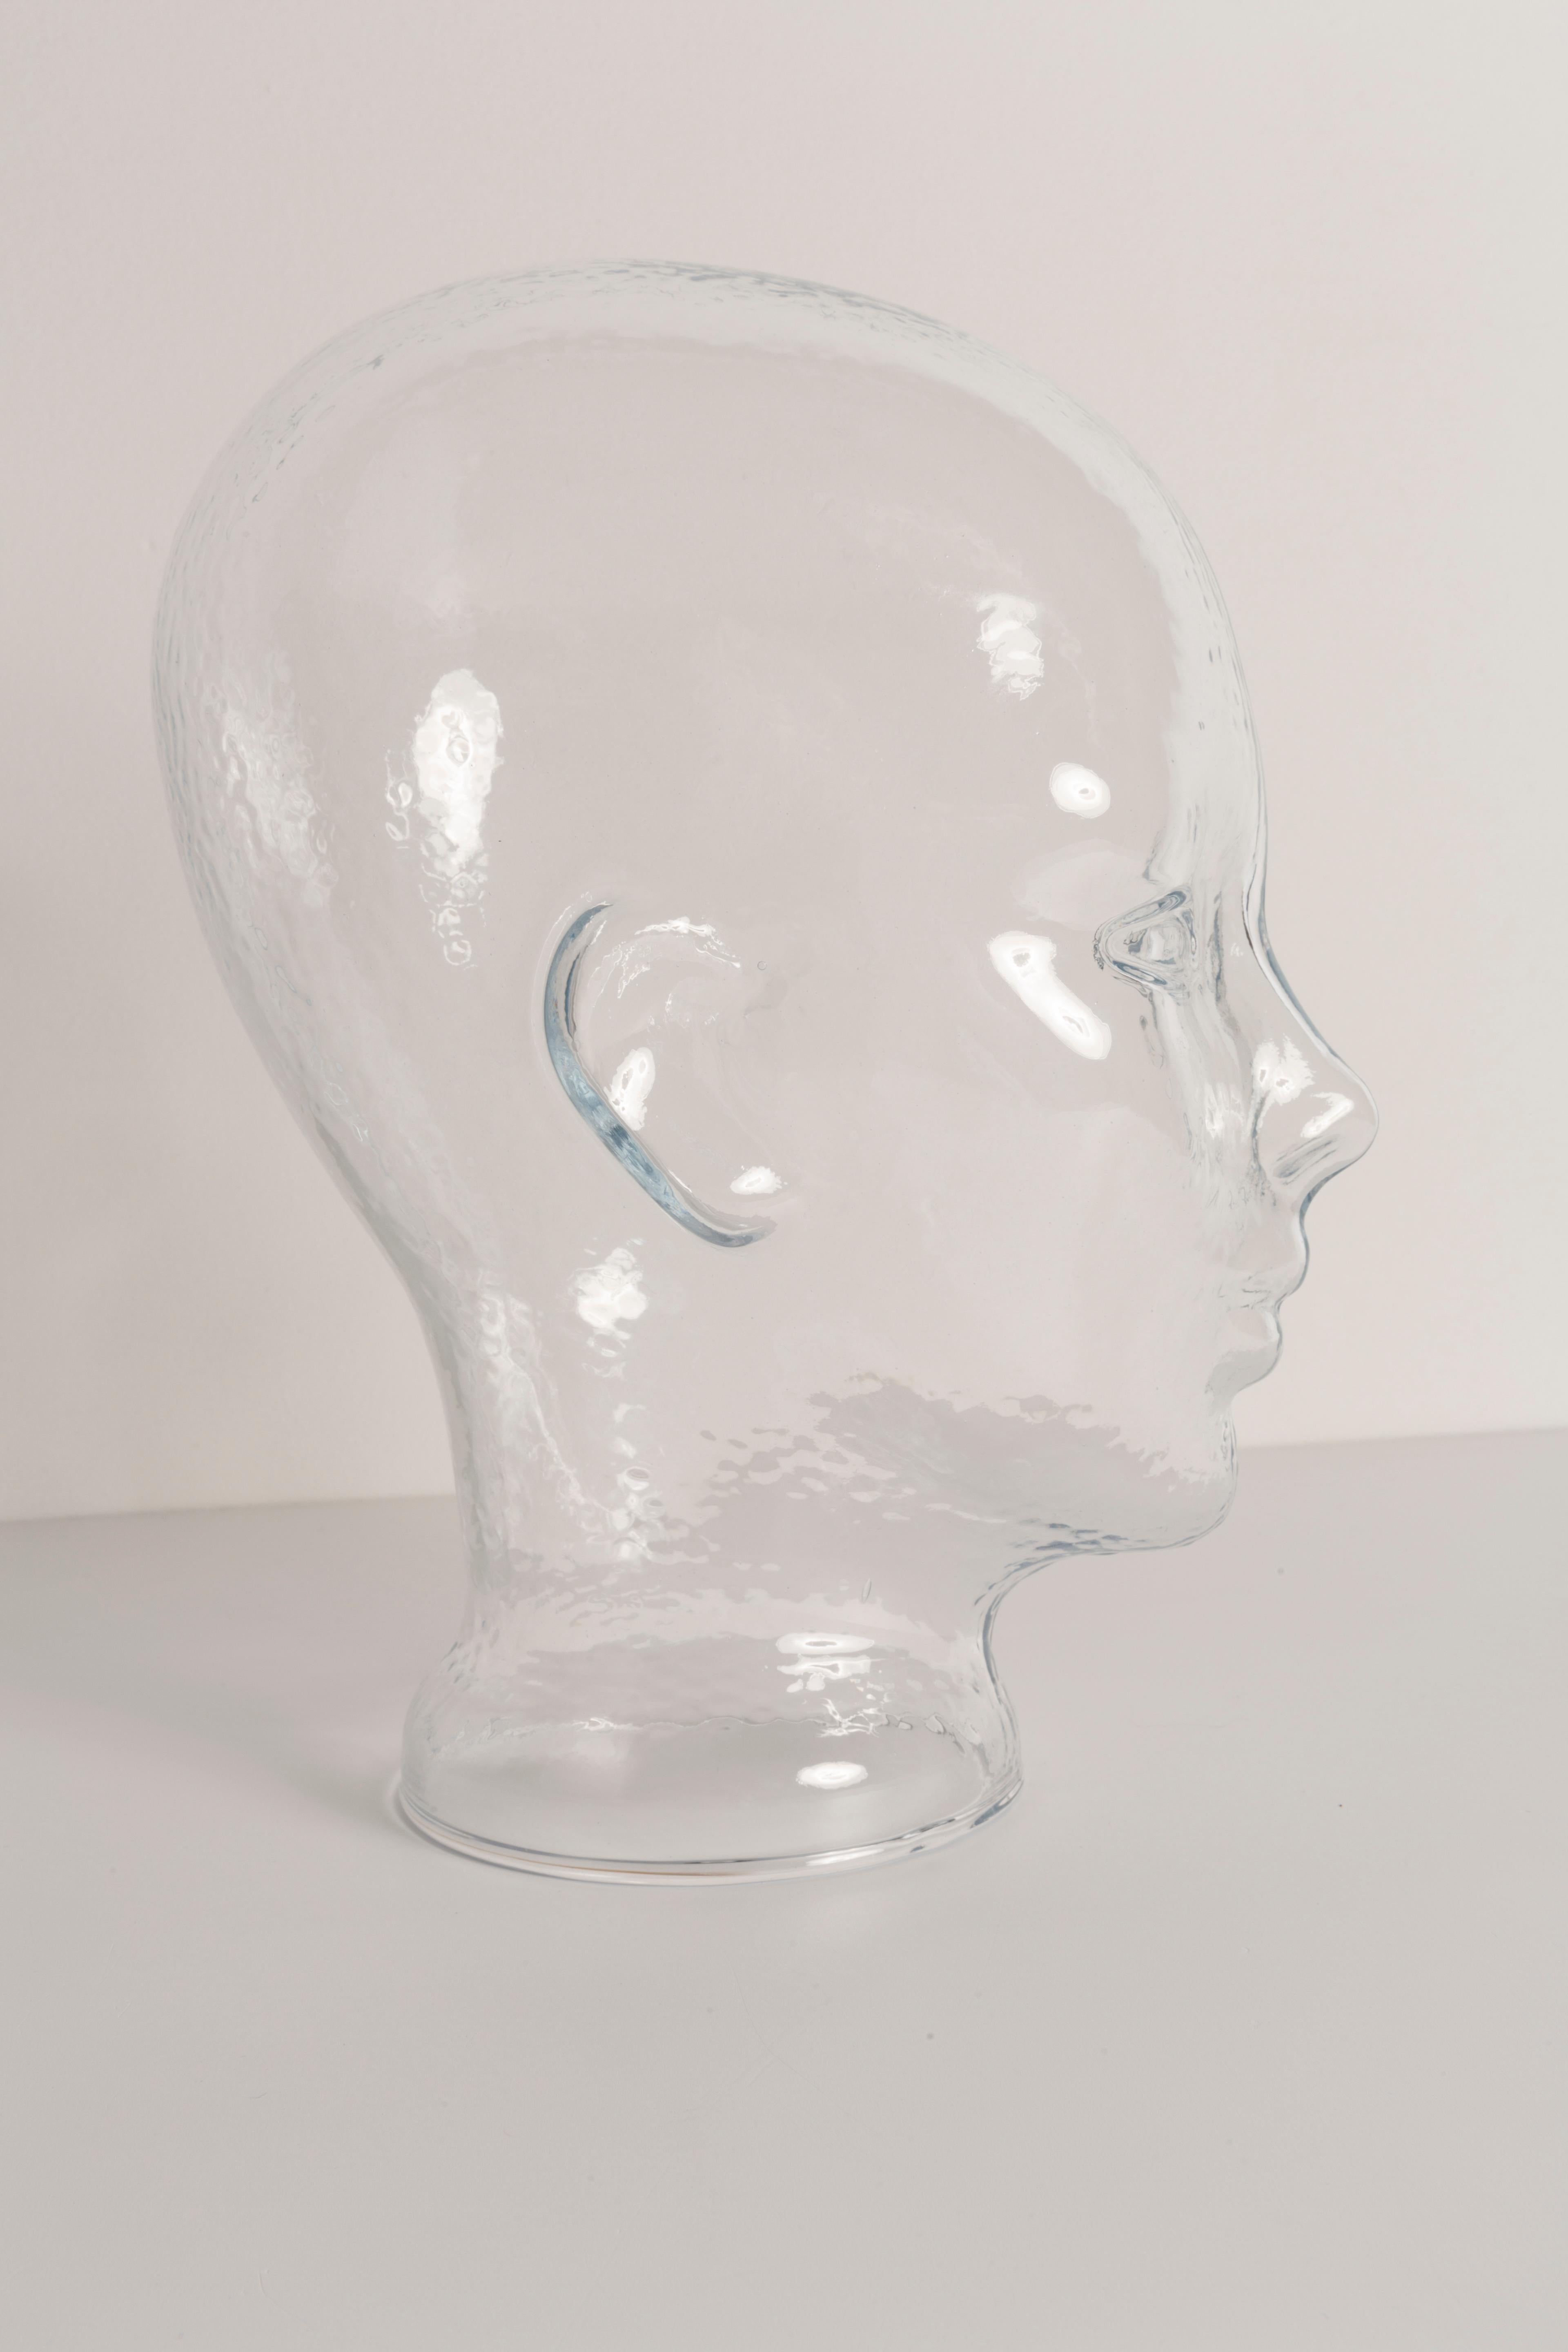 Vintage 1970s Space Age Glass Mannequin Heads AmberYellow and Transparent